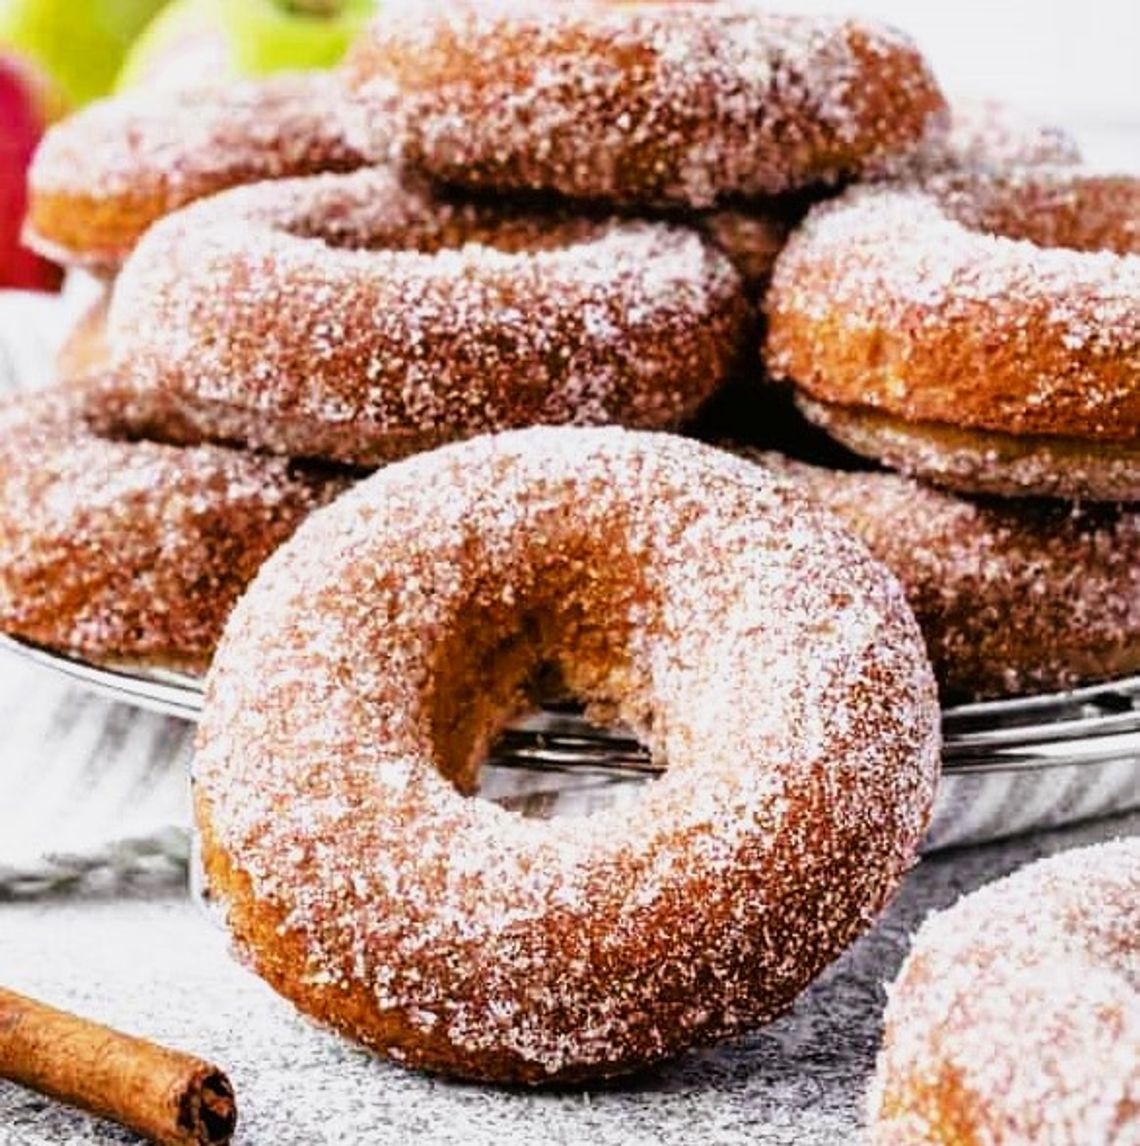 Baked apple cider doughnuts are the perfect fall treat with a cup of hot apple cider or coffee.